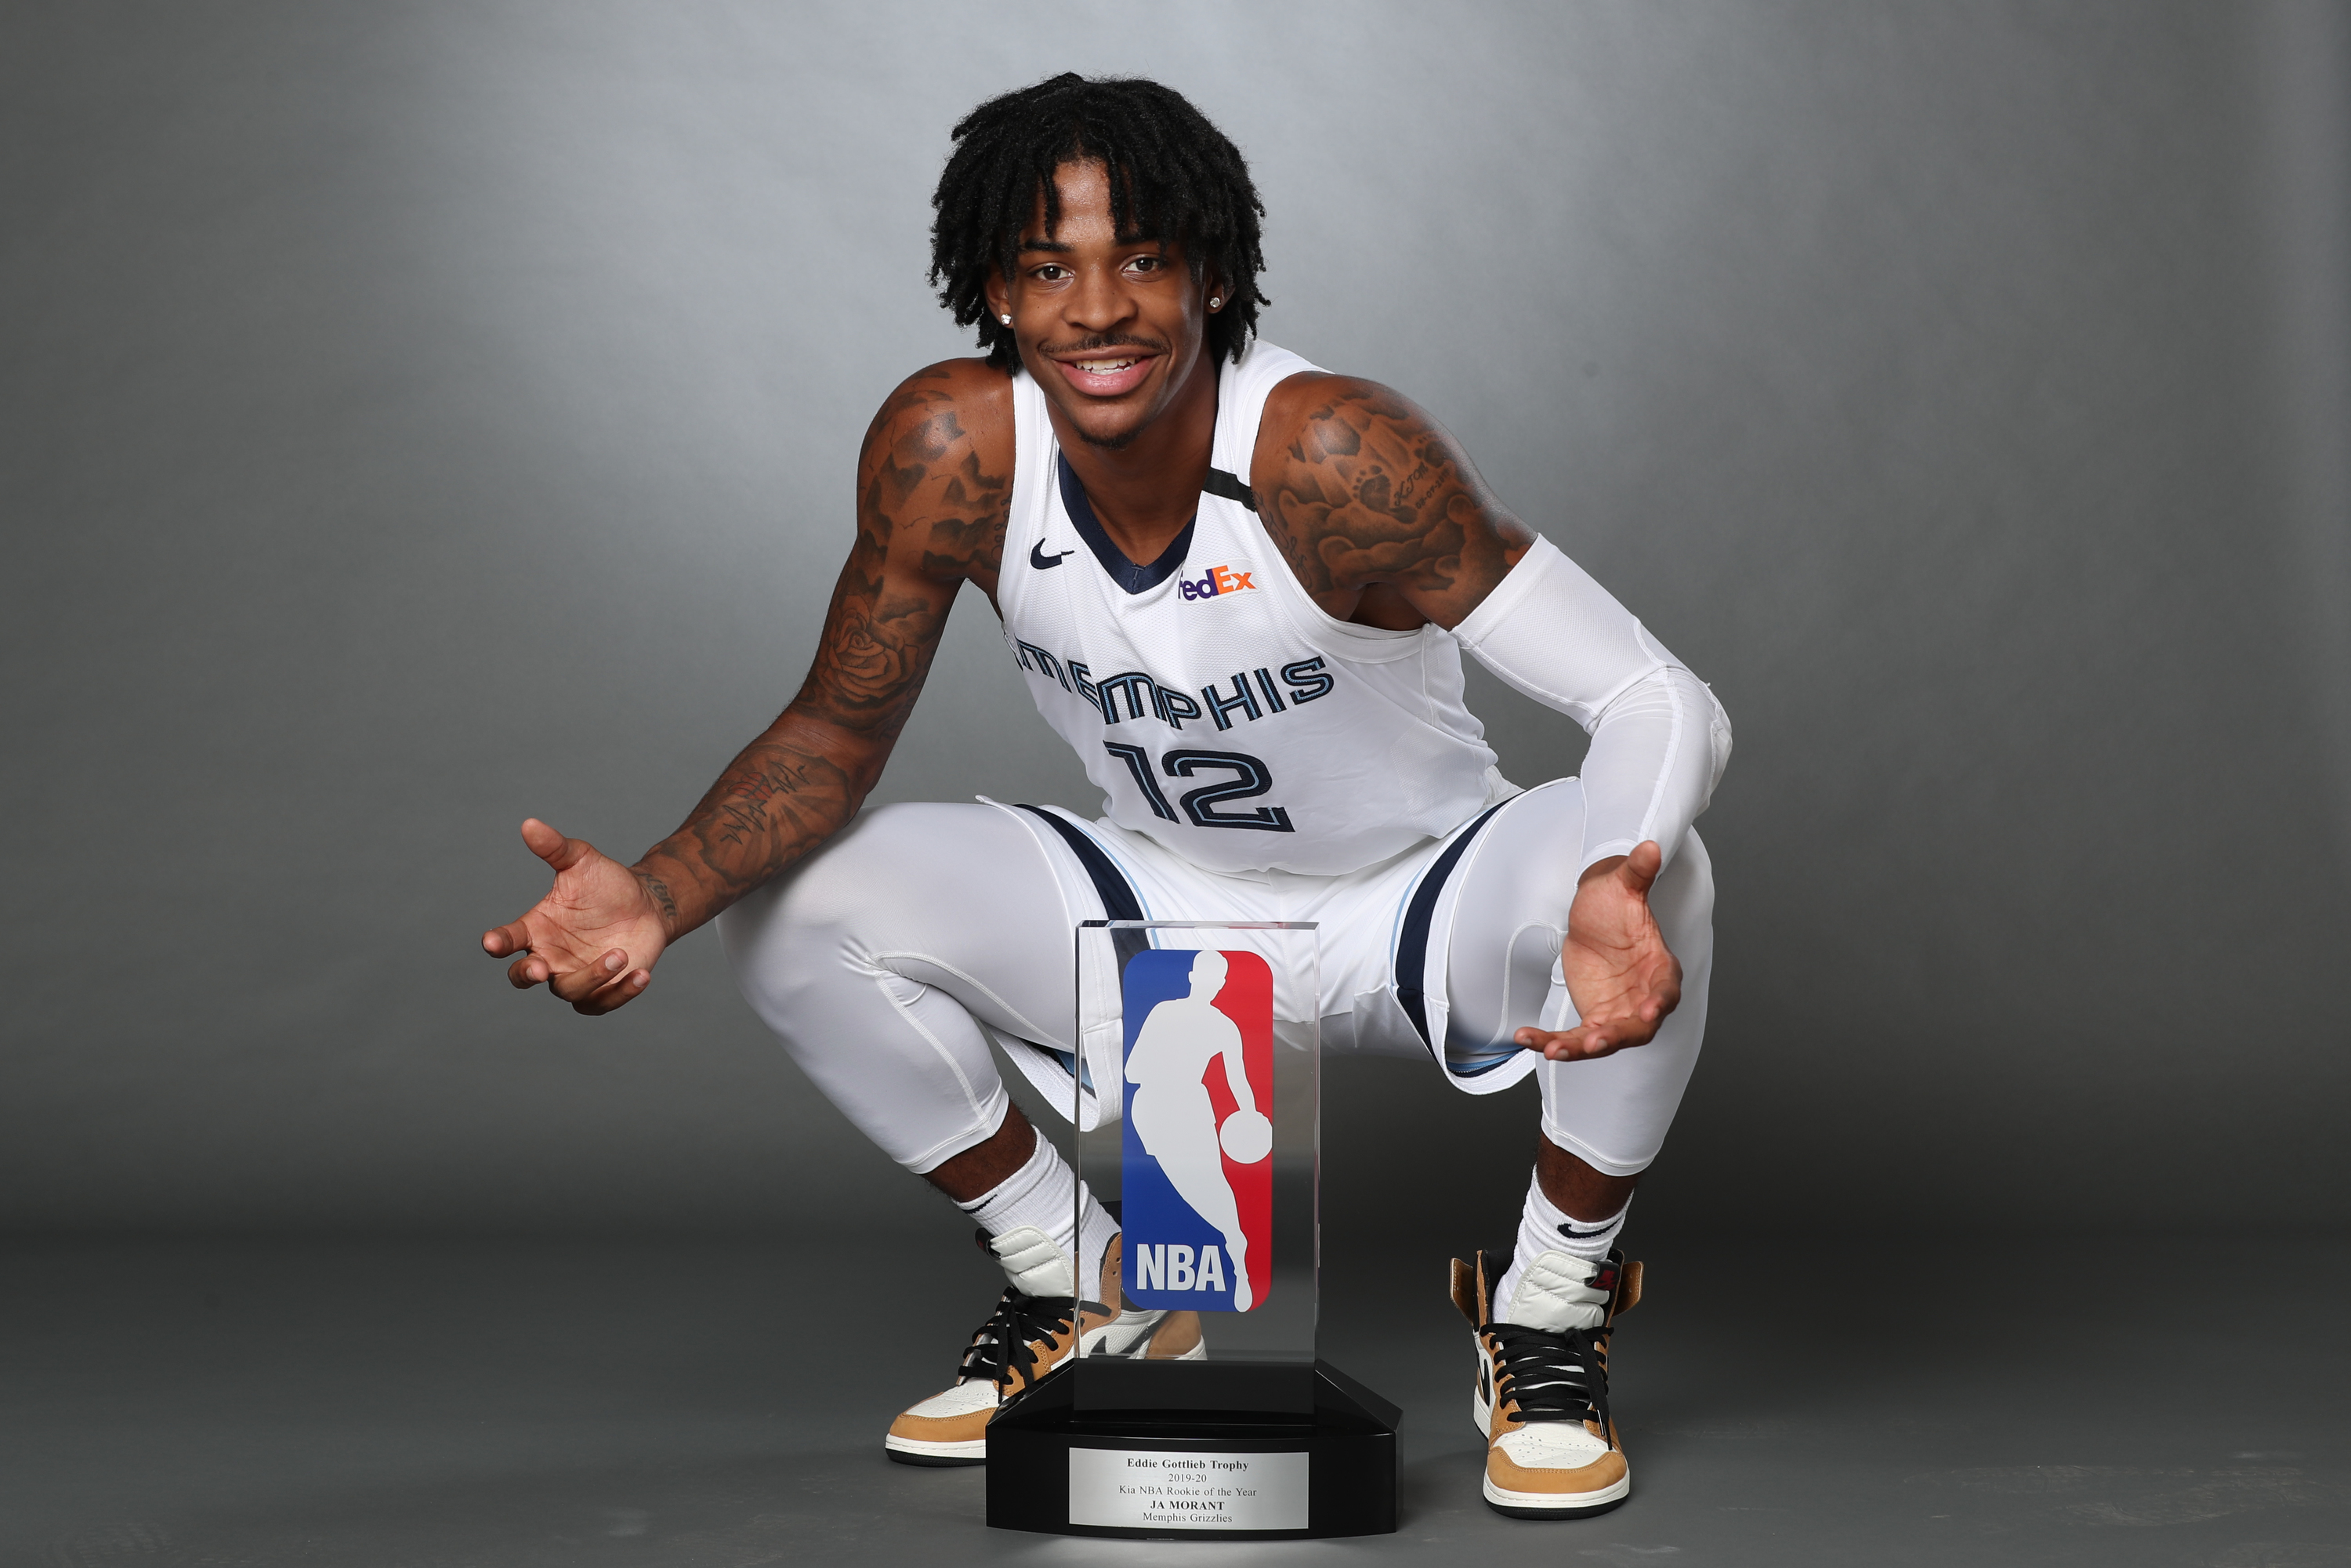 2019-20 Rookie of the Year Award